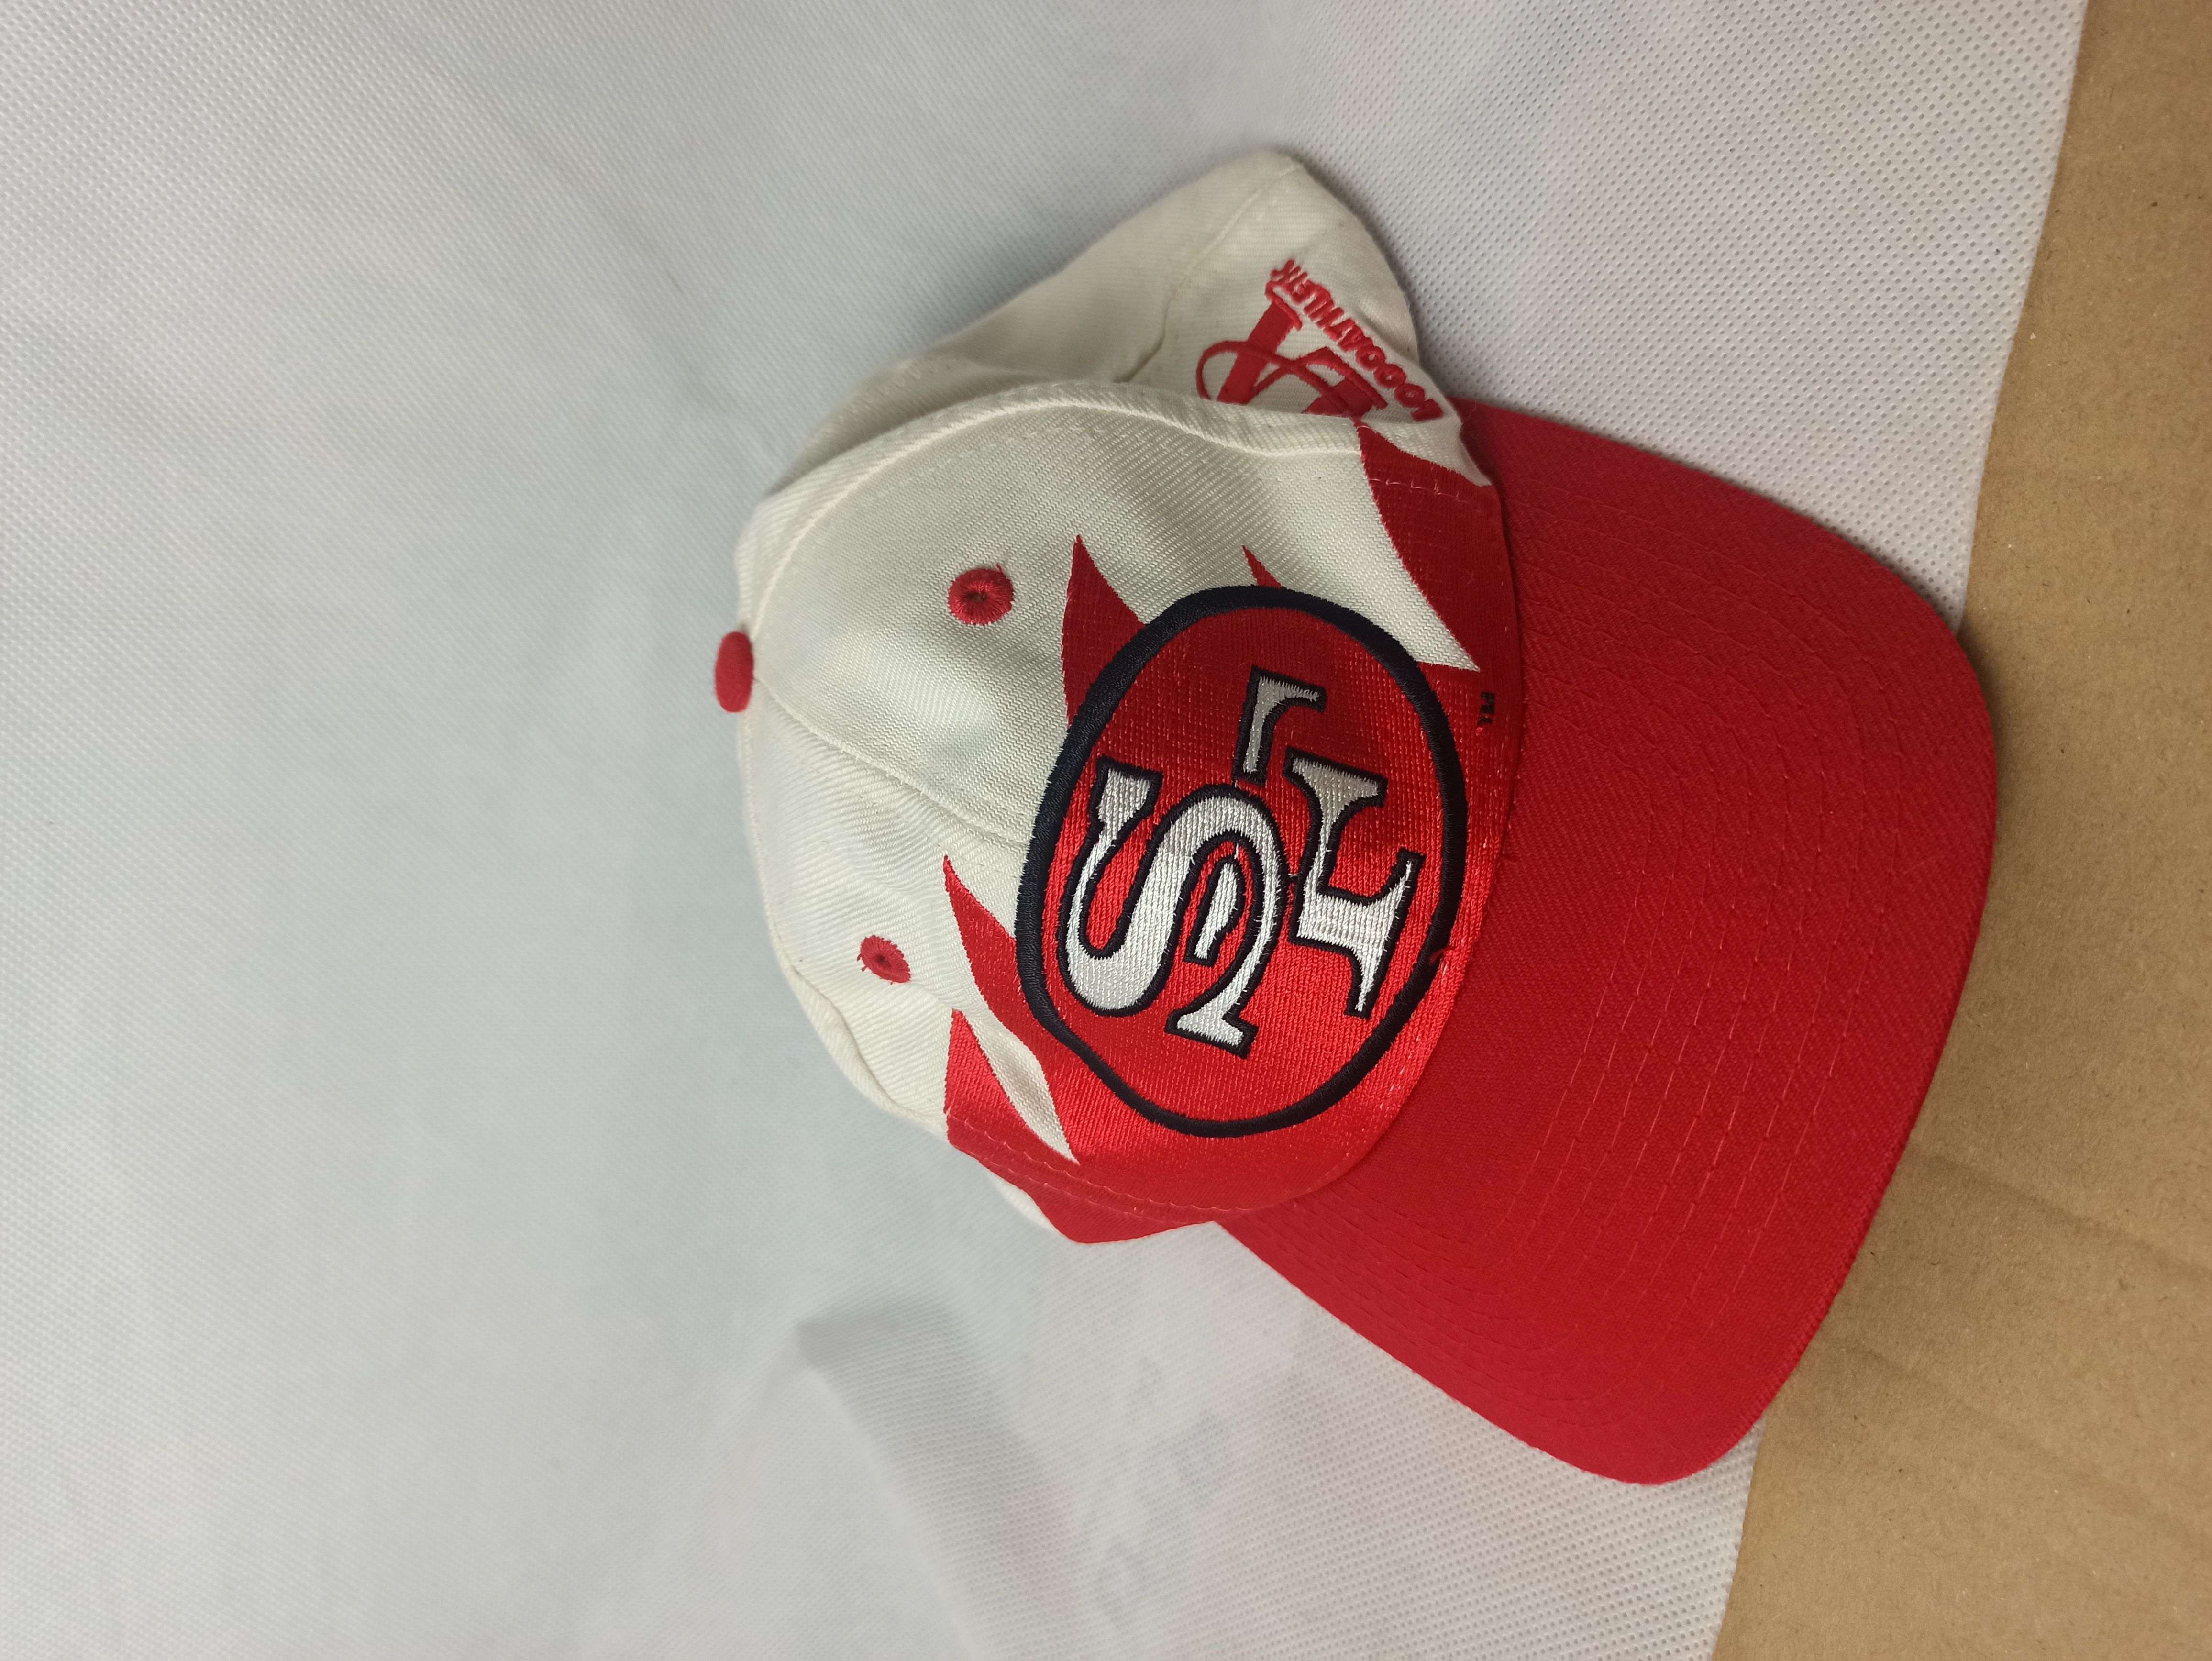 49ers shark tooth hat